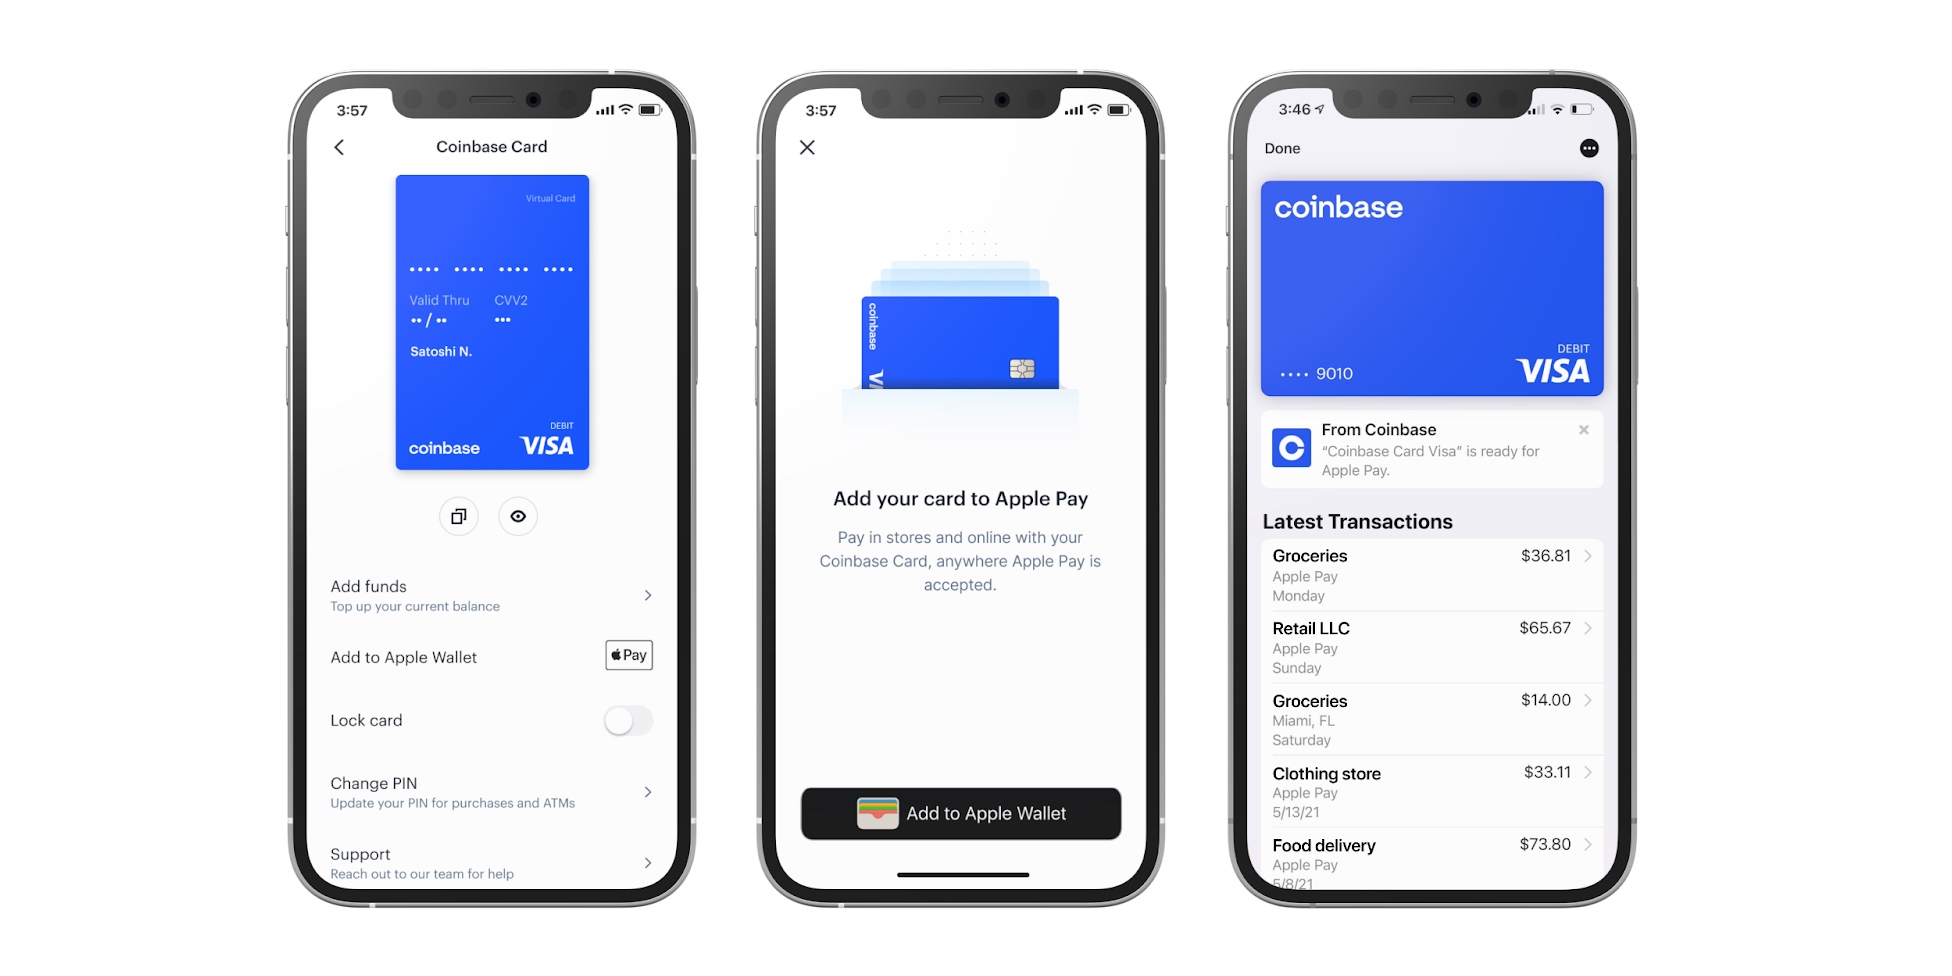 crypto.com card to apple wallet